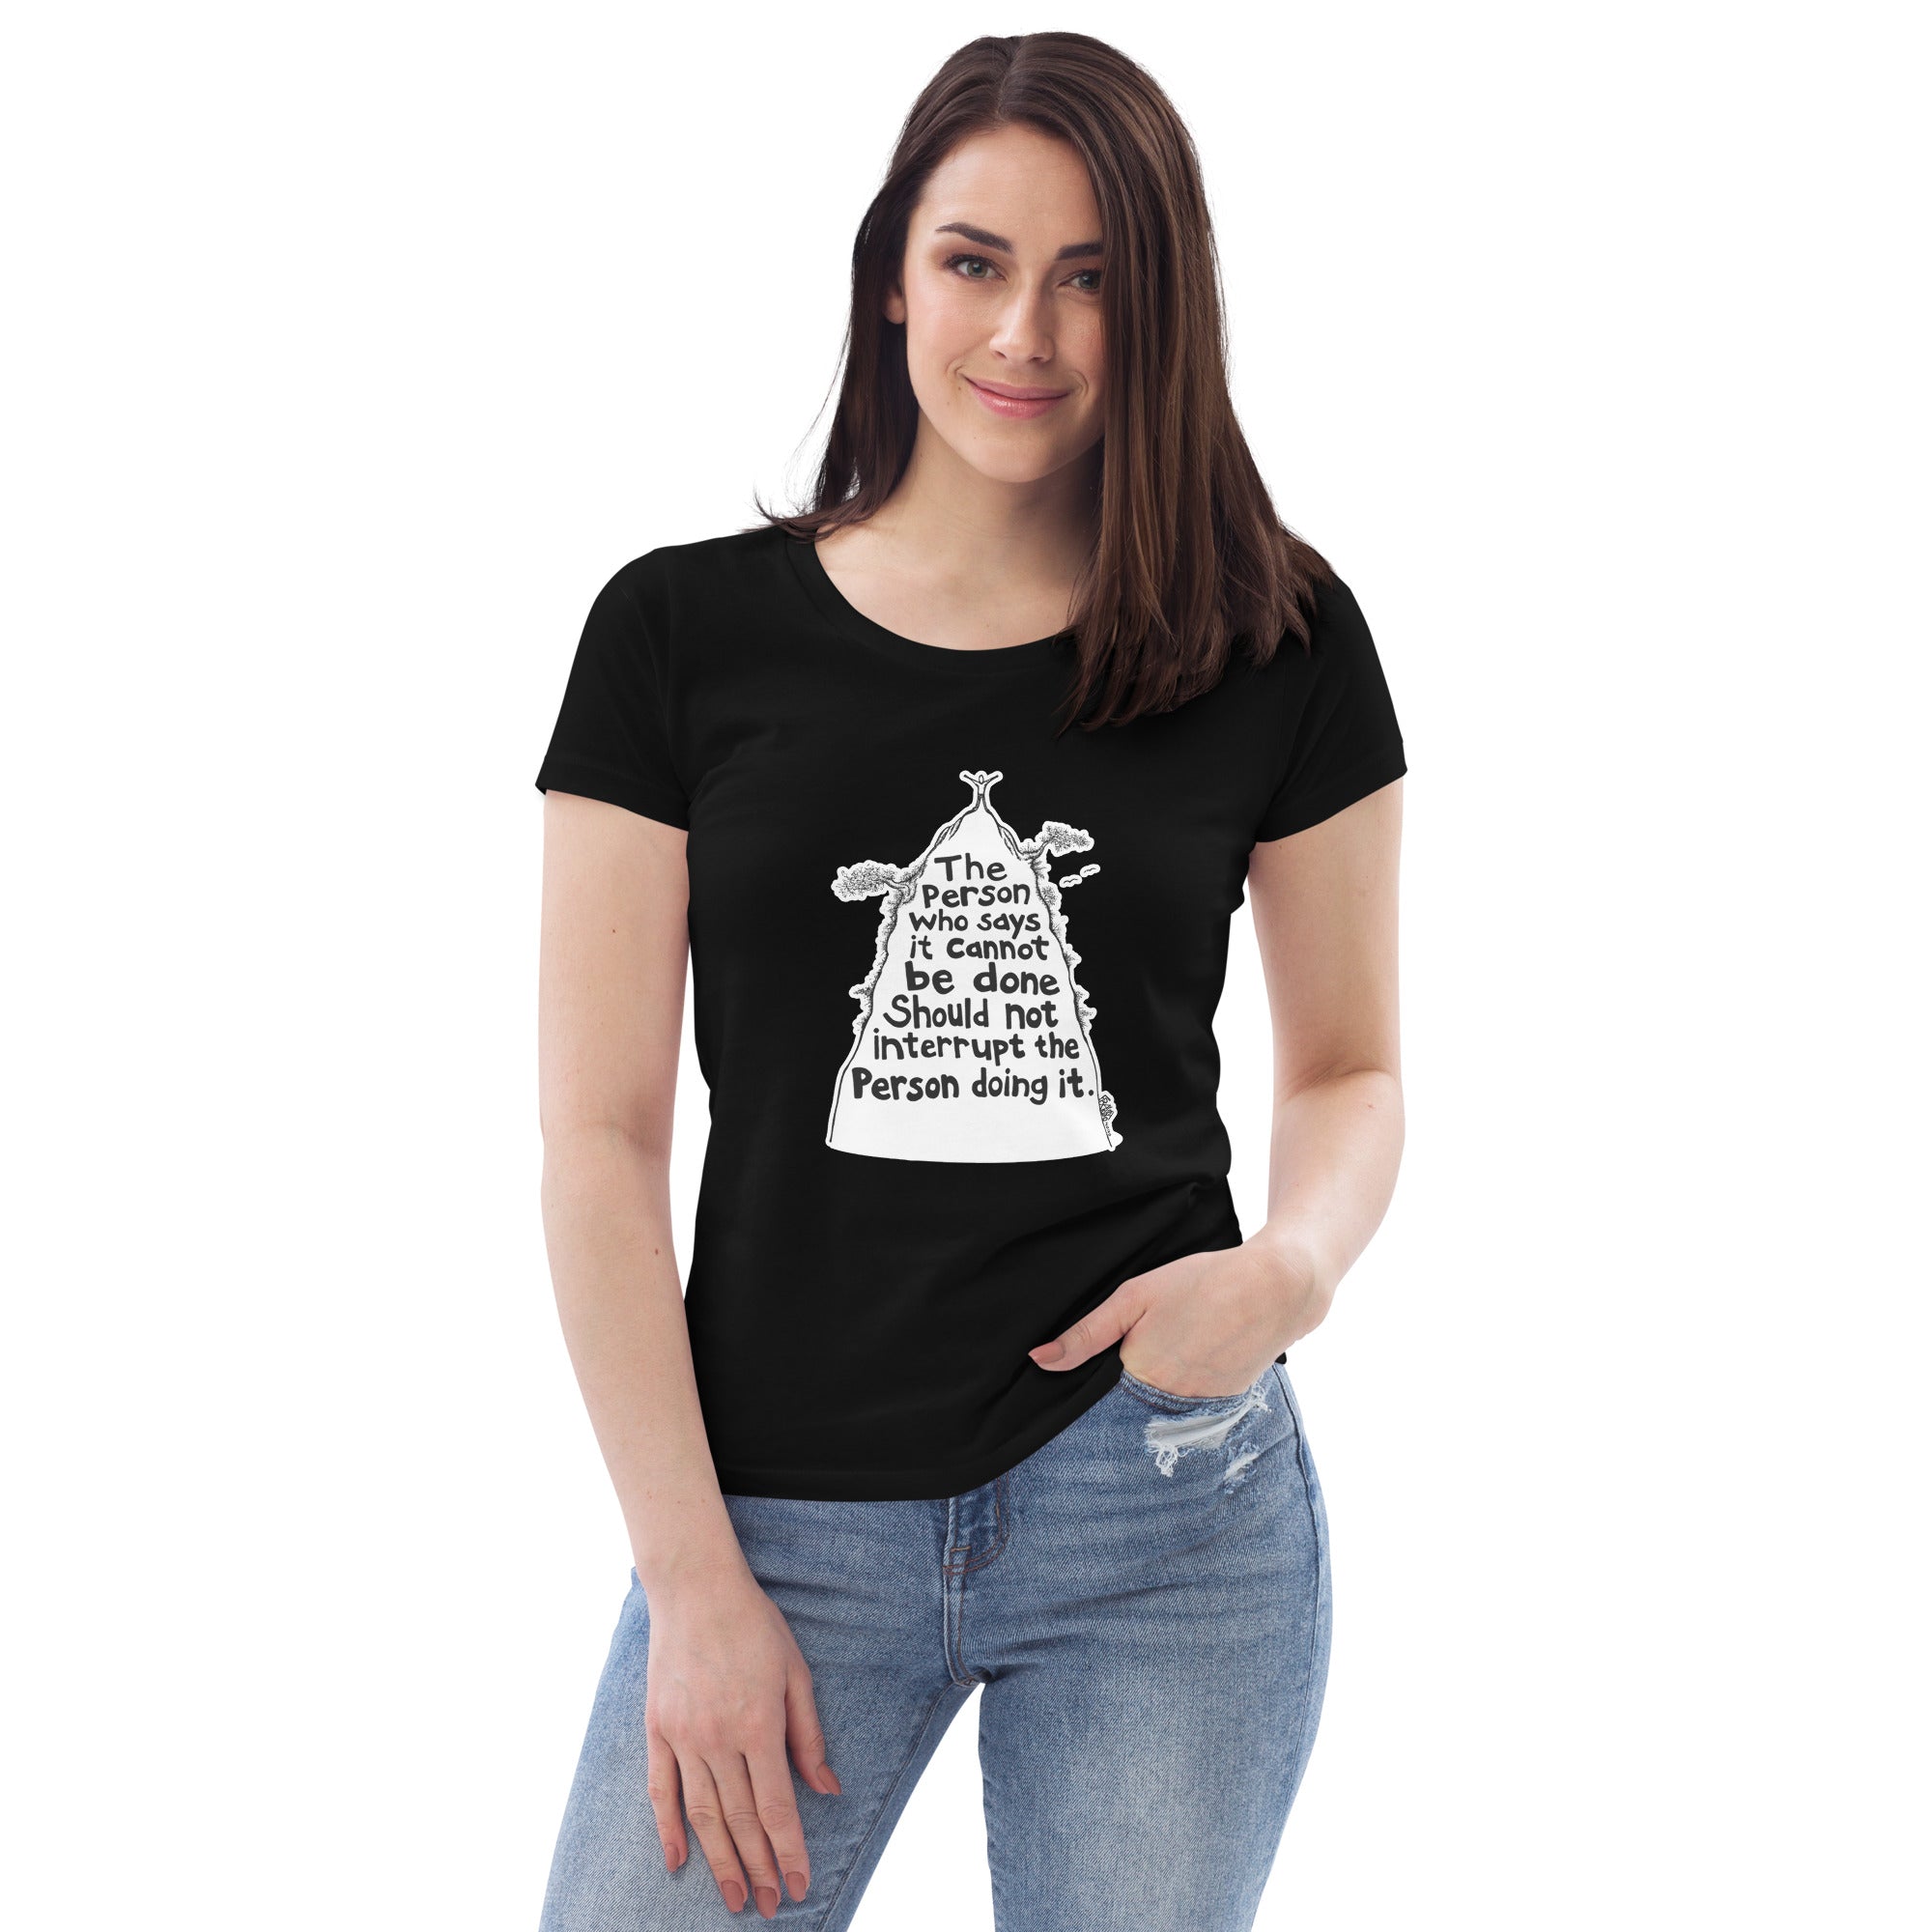 Mountain Top Organic Cotton Scoop Neck T-Shirt In Black By Artist Rick Frausto